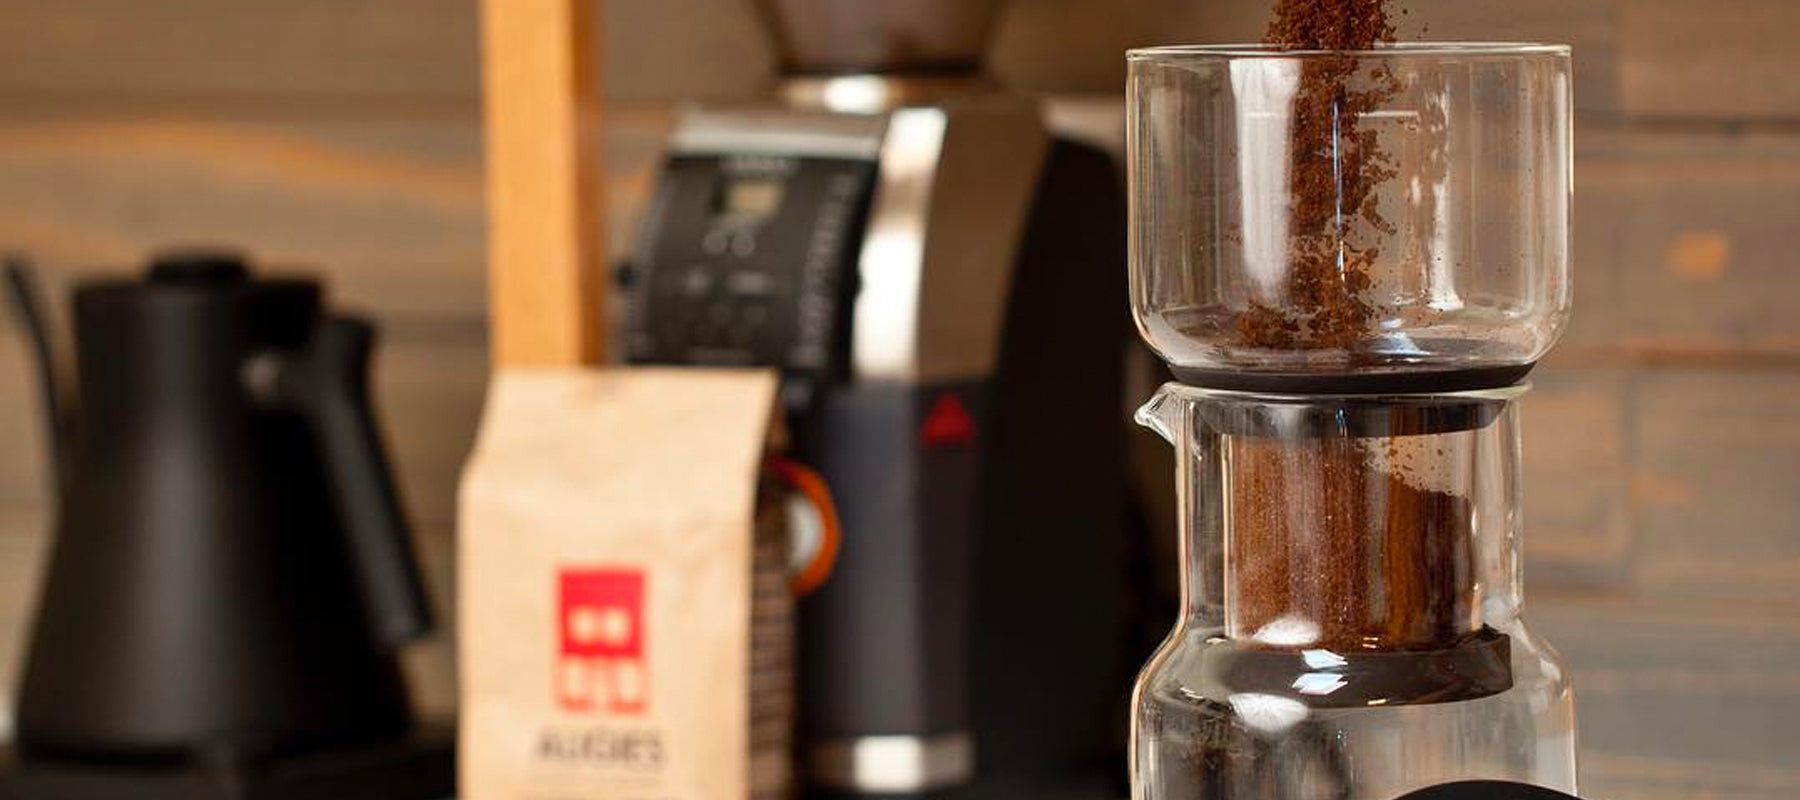 Bruer Coffee Maker online at The Coffee Collective NZ